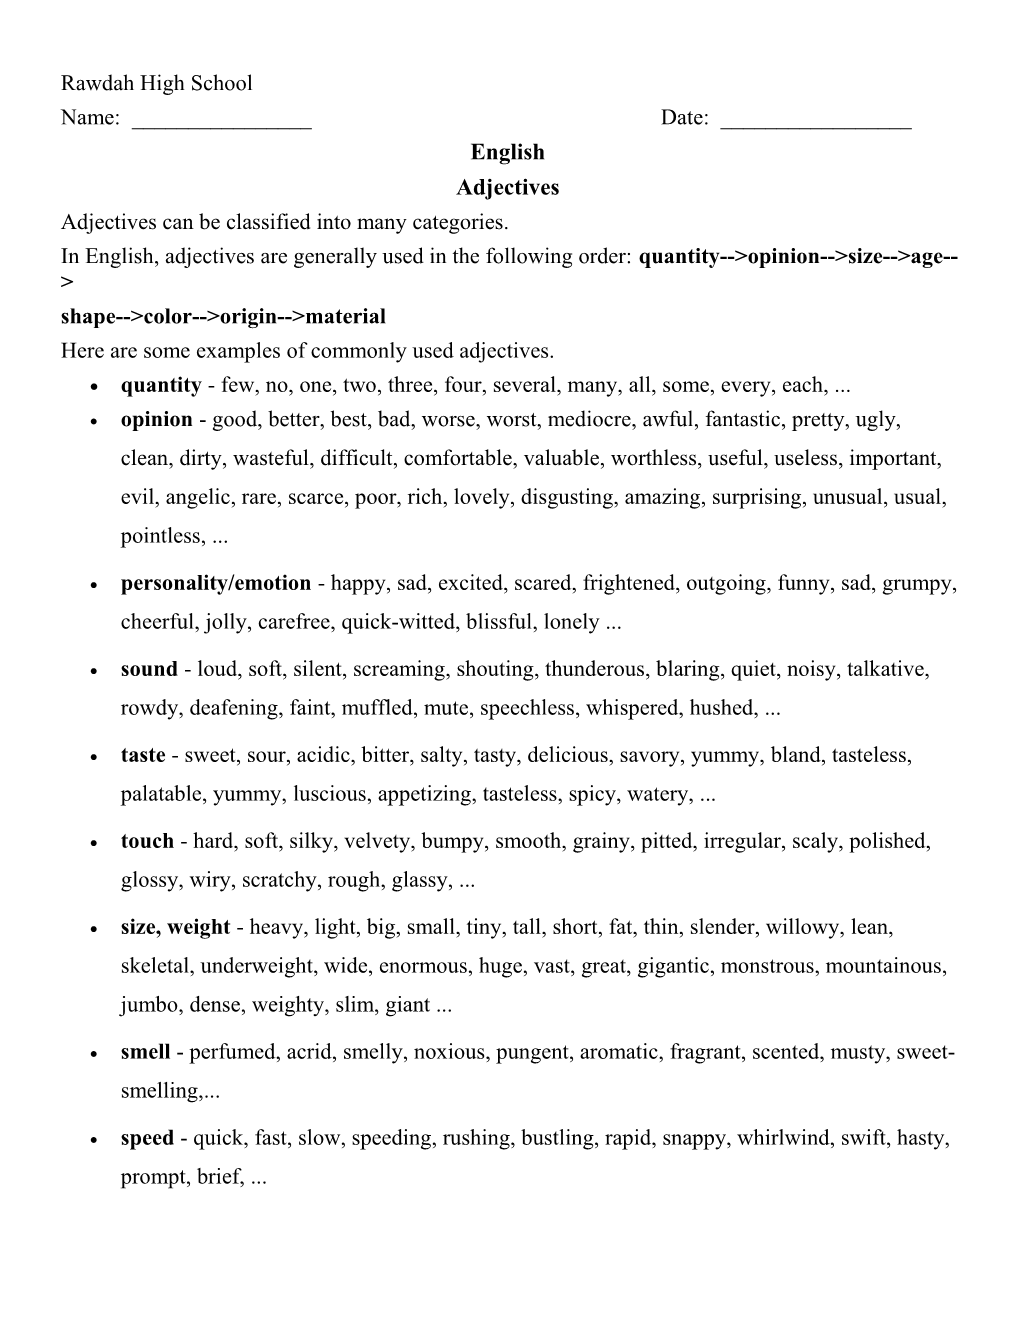 Adjectives Can Be Classified Into Many Categories